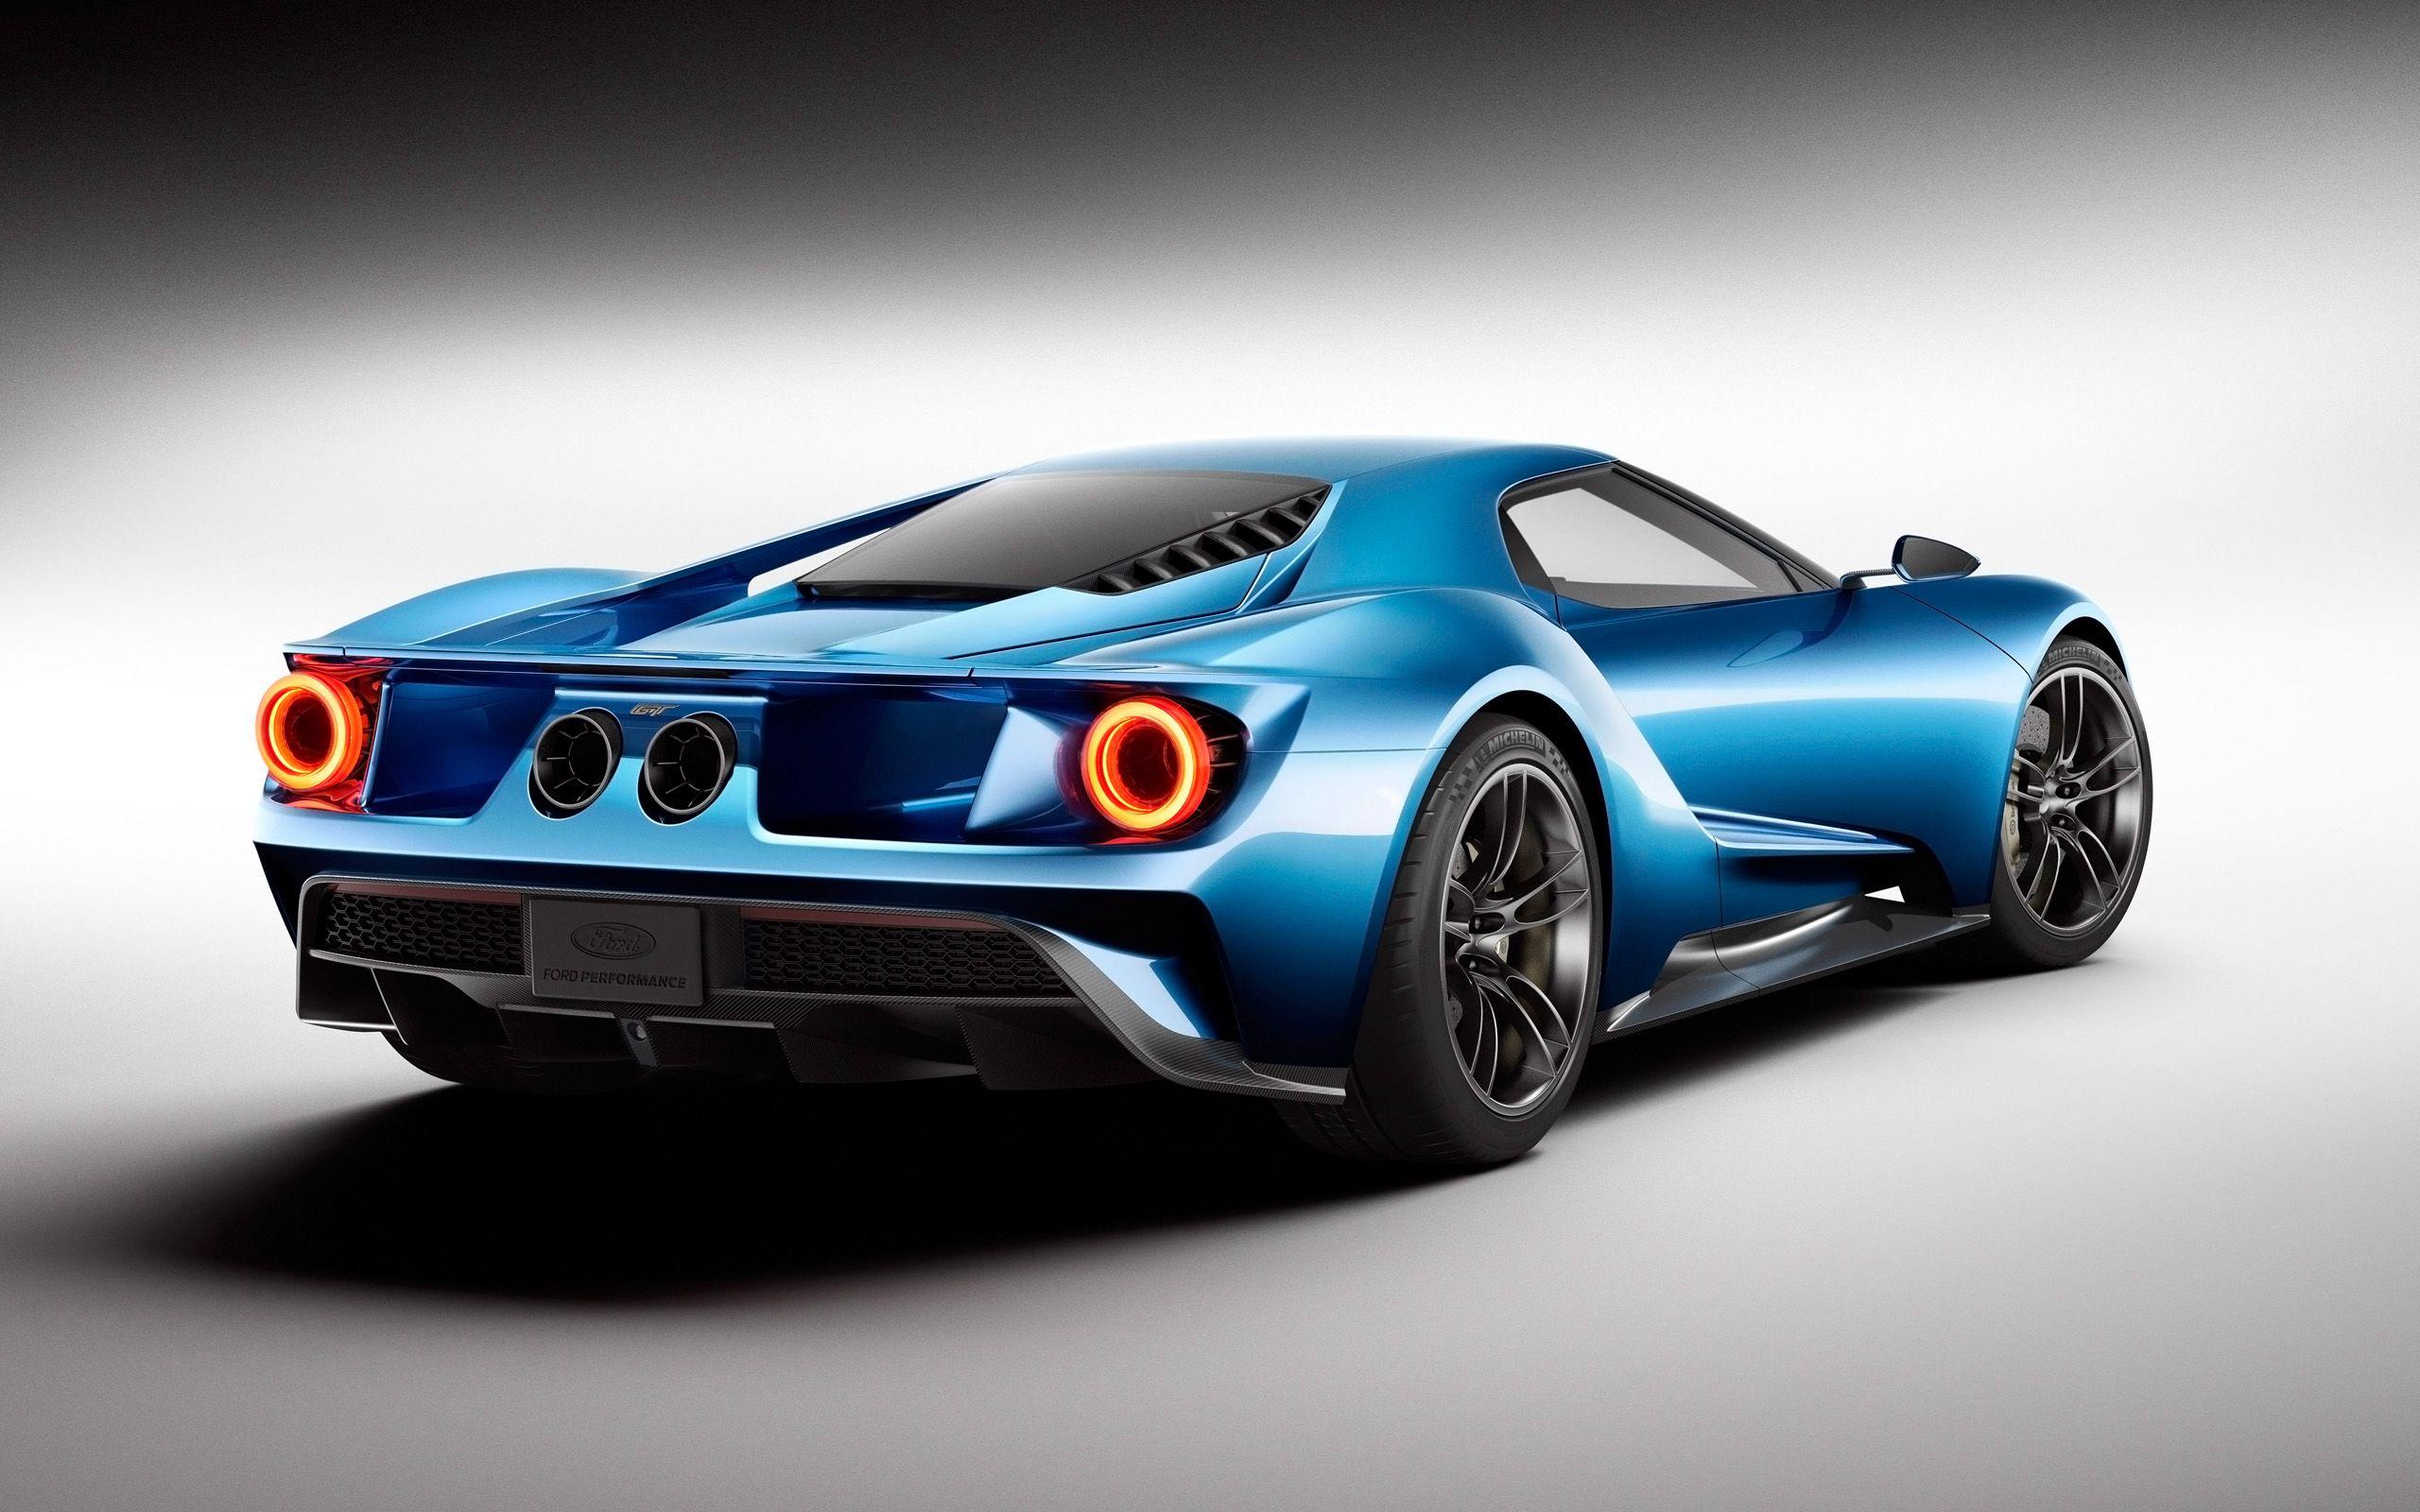 Ford GT 2 Rear View Wallpaper 47511 2560x1600 px